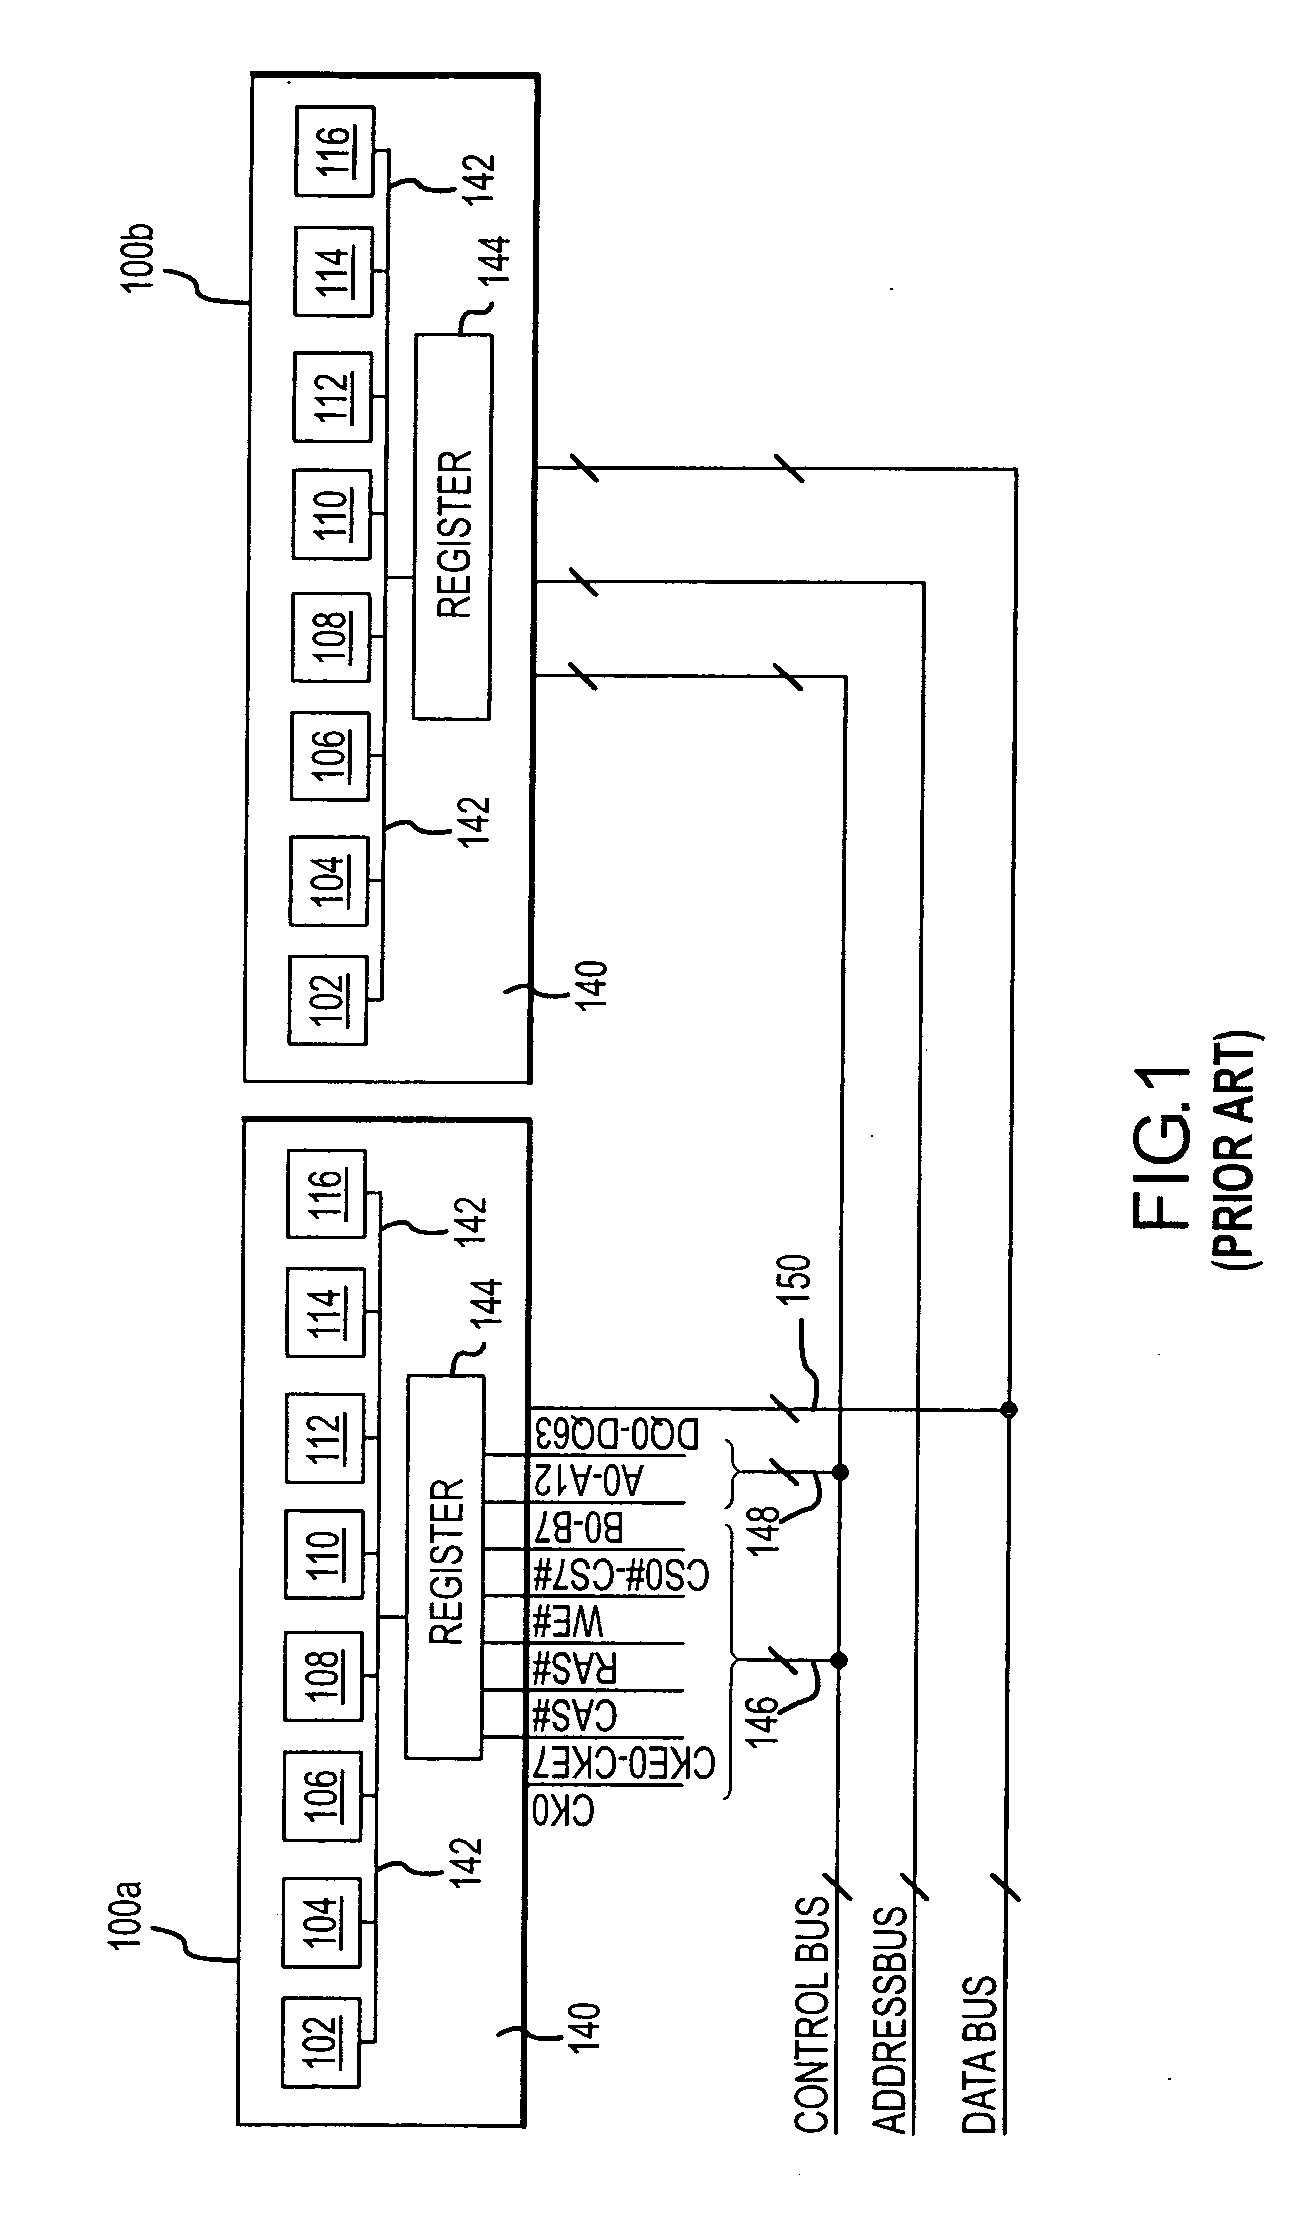 System and method for optimizing interconnections of components in a multichip memory module